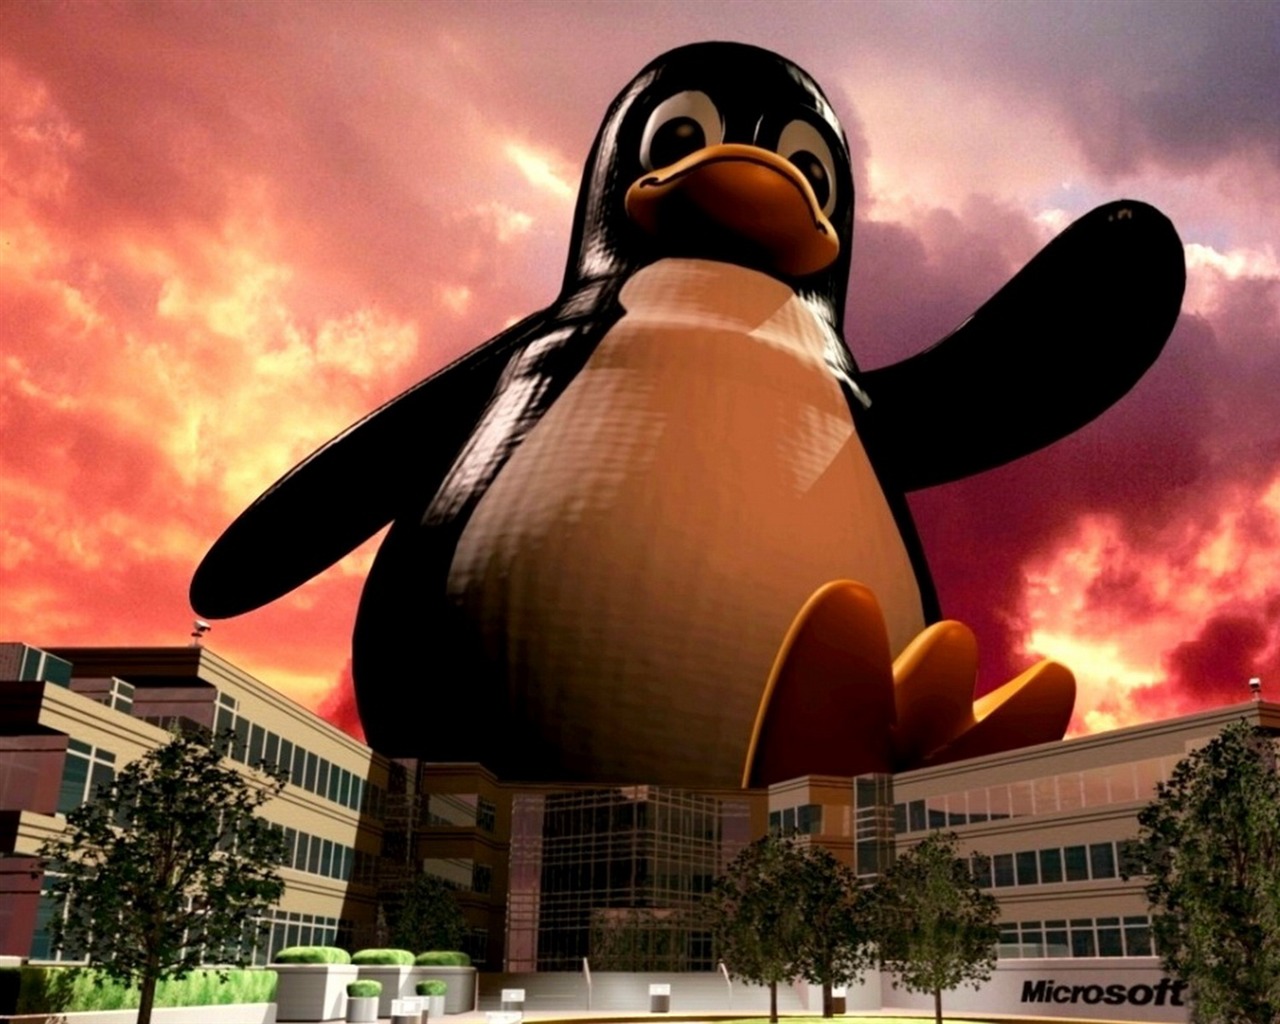 Linux tapety (2) #10 - 1280x1024